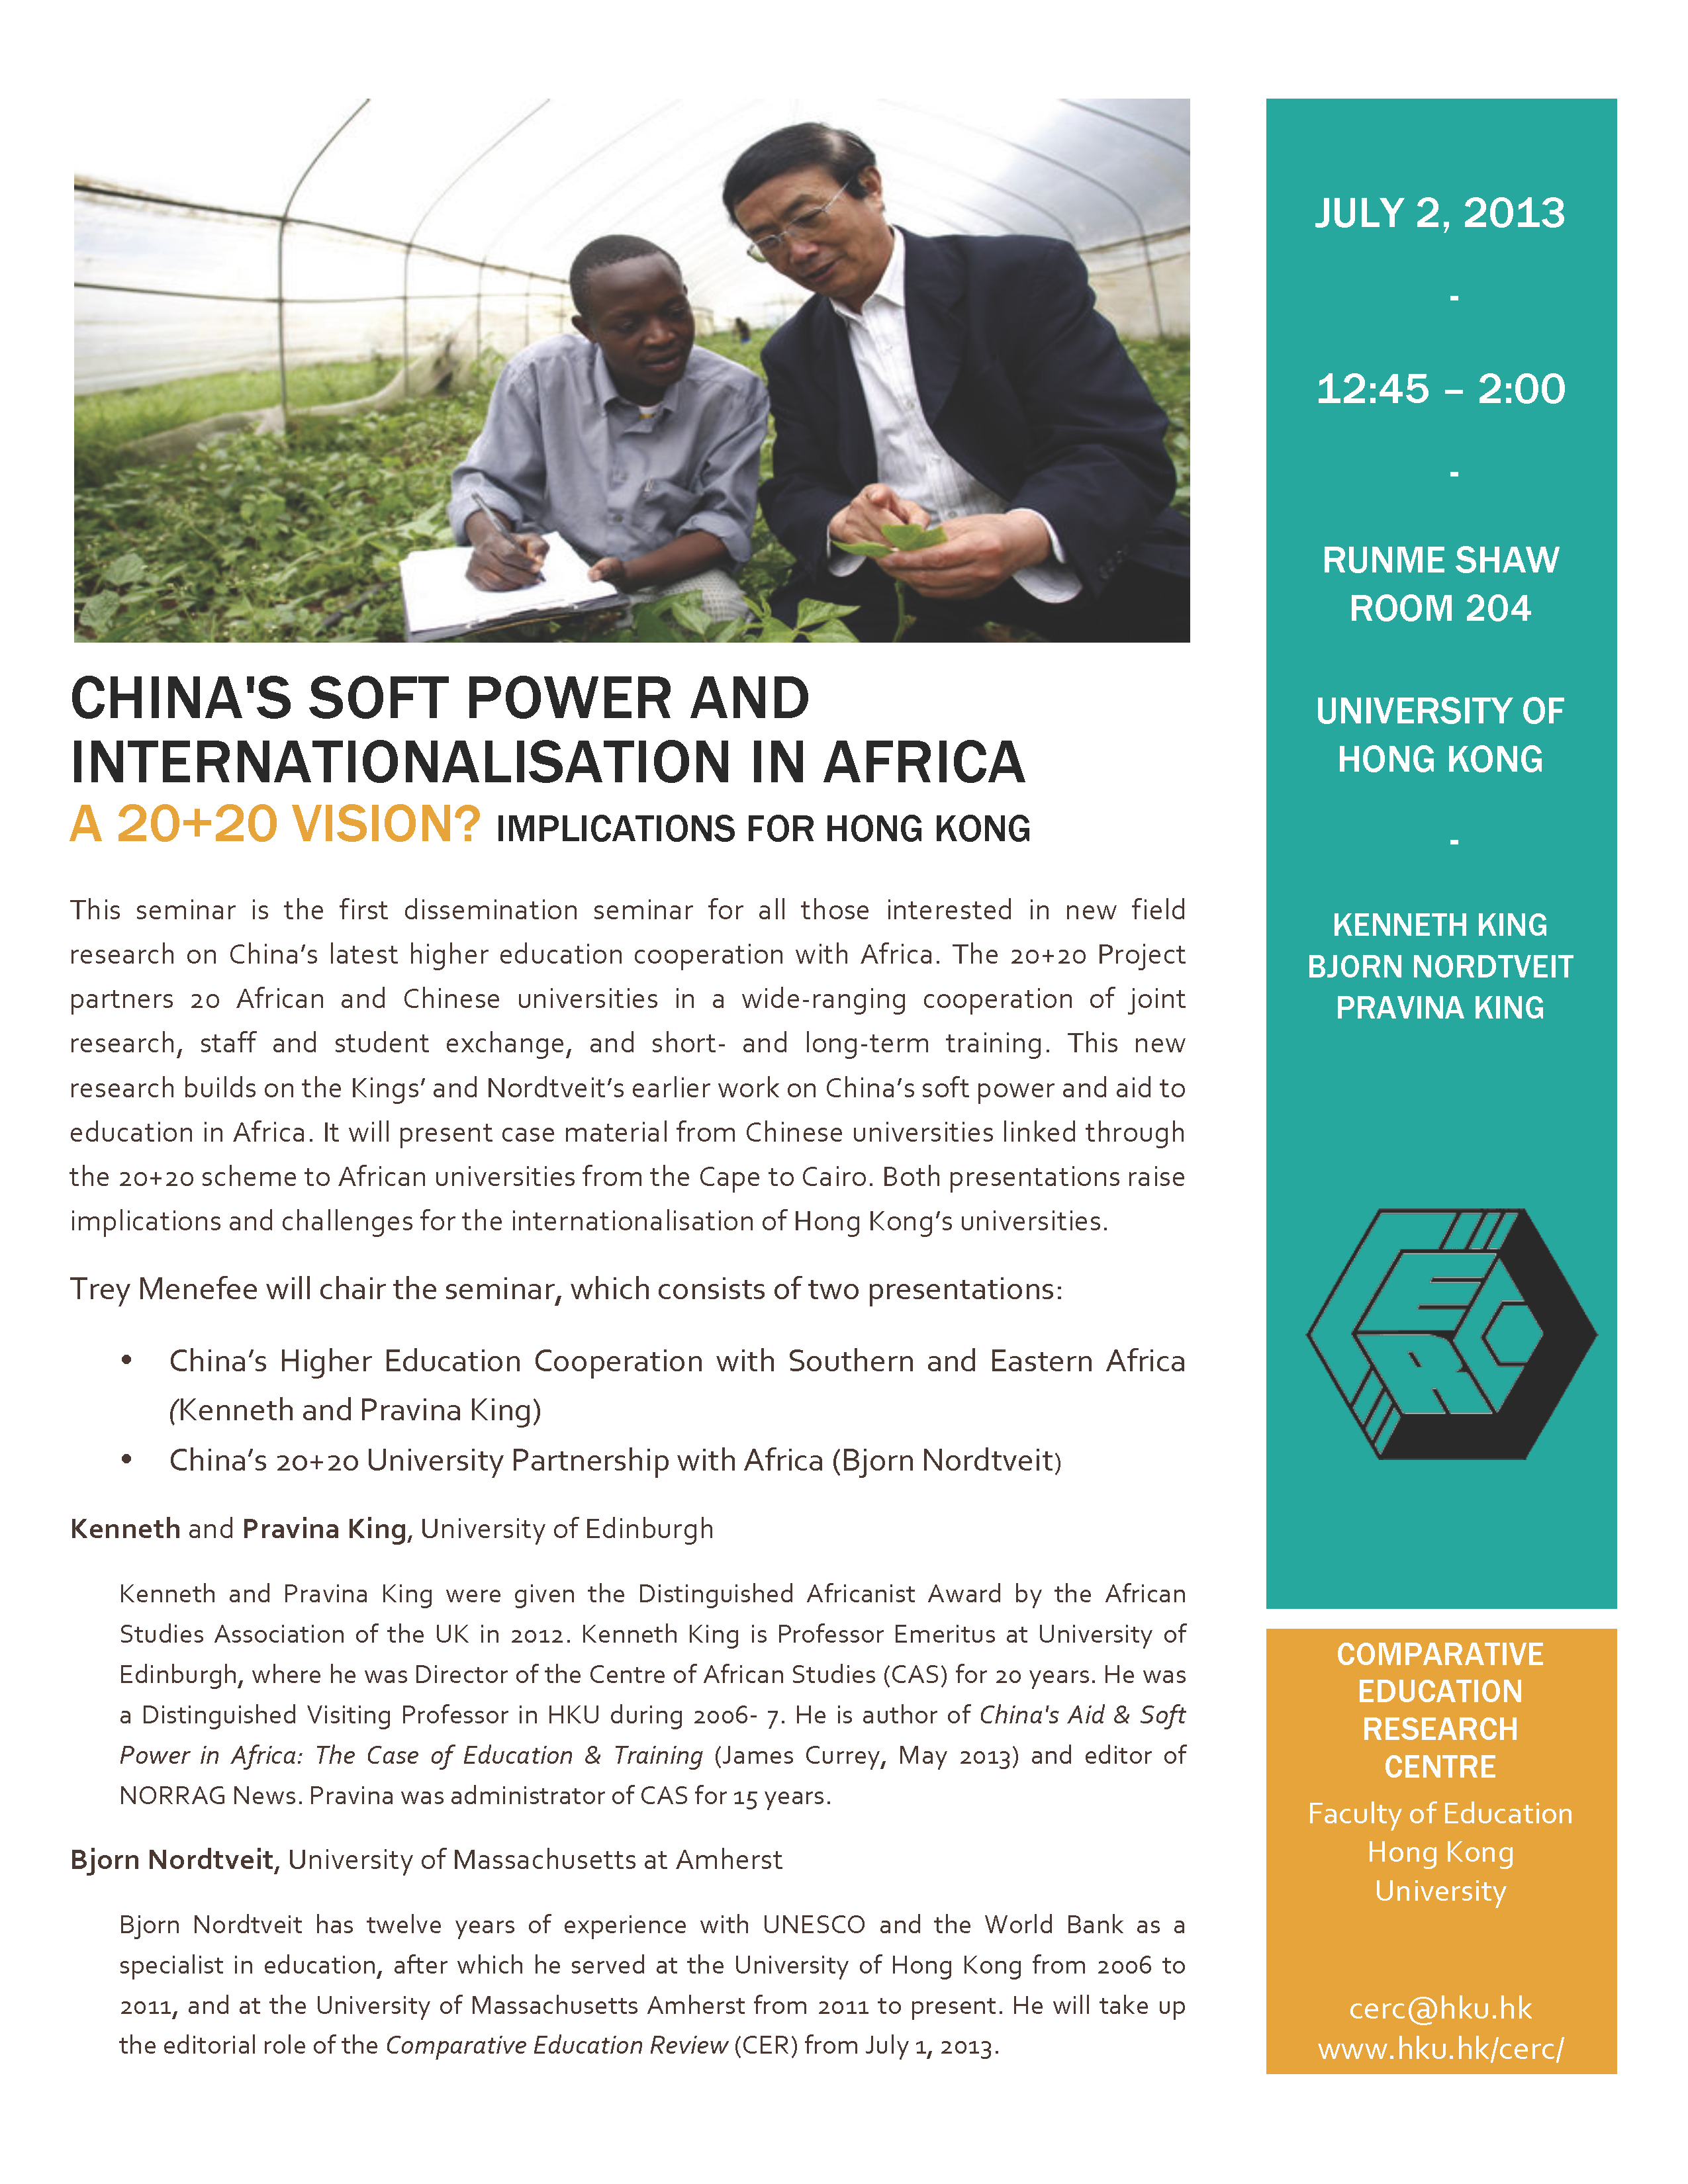 Seminar - CHINA'S SOFT POWER AND INTERNATIONALISATION IN AFRICA